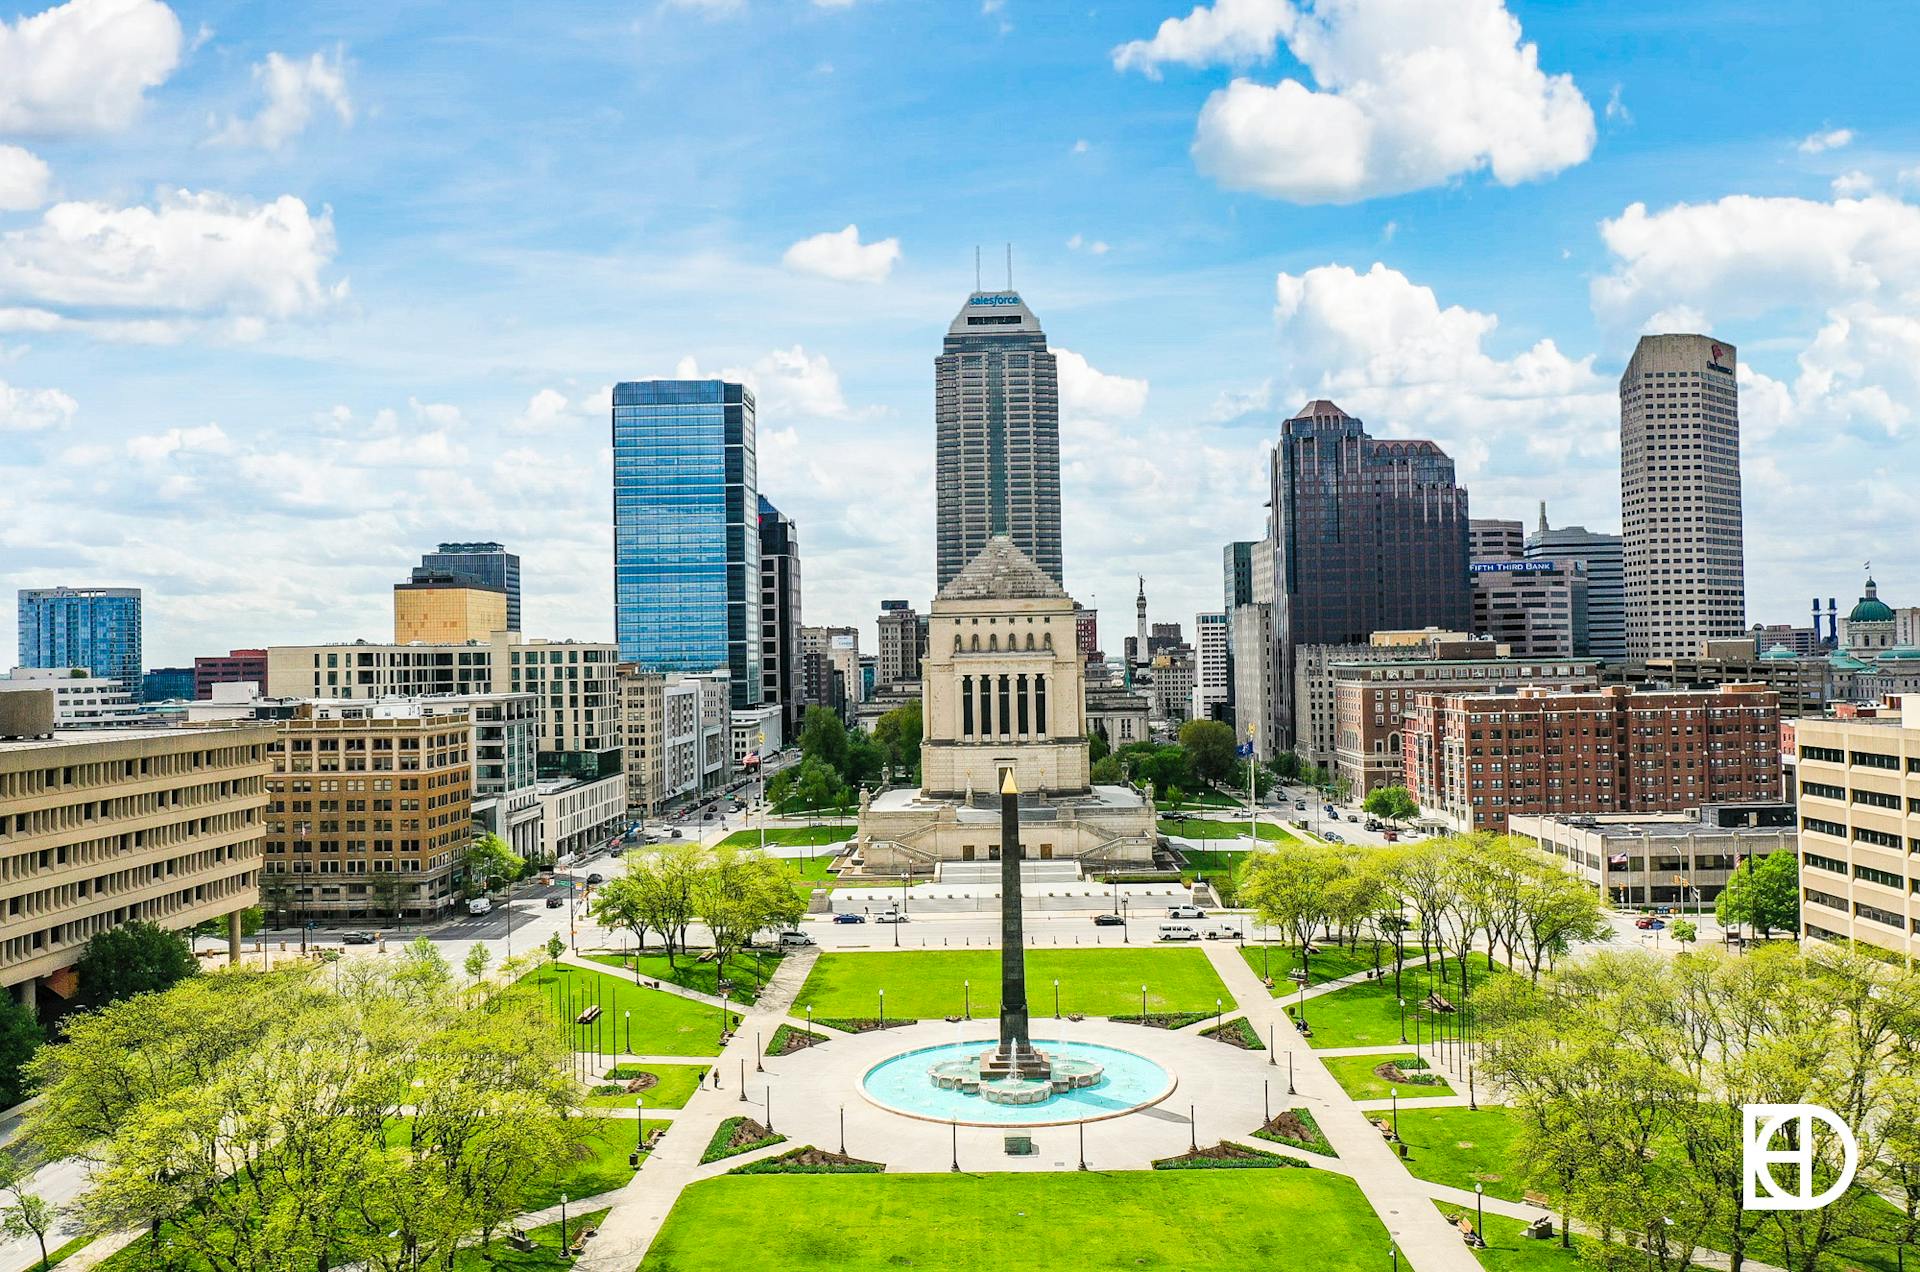 Aerial view of Indiana World War Memorial and Veterans' Memorial Plaza with downtown Indianapolis skyline behind.